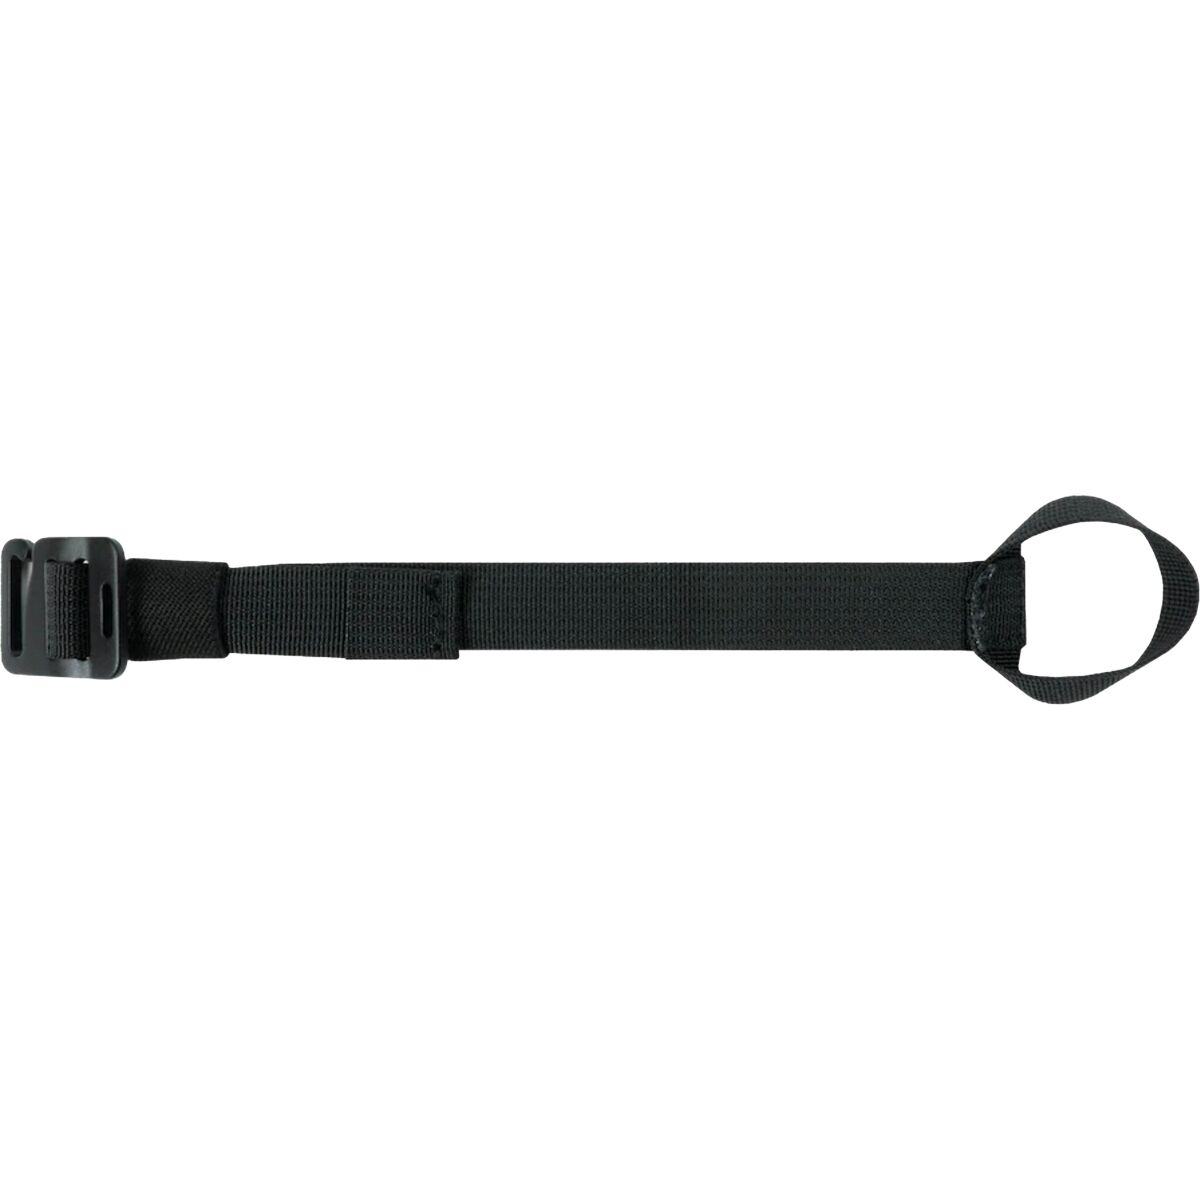 ABS Avalanche Rescue Devices A.Light - Rope Strap Black